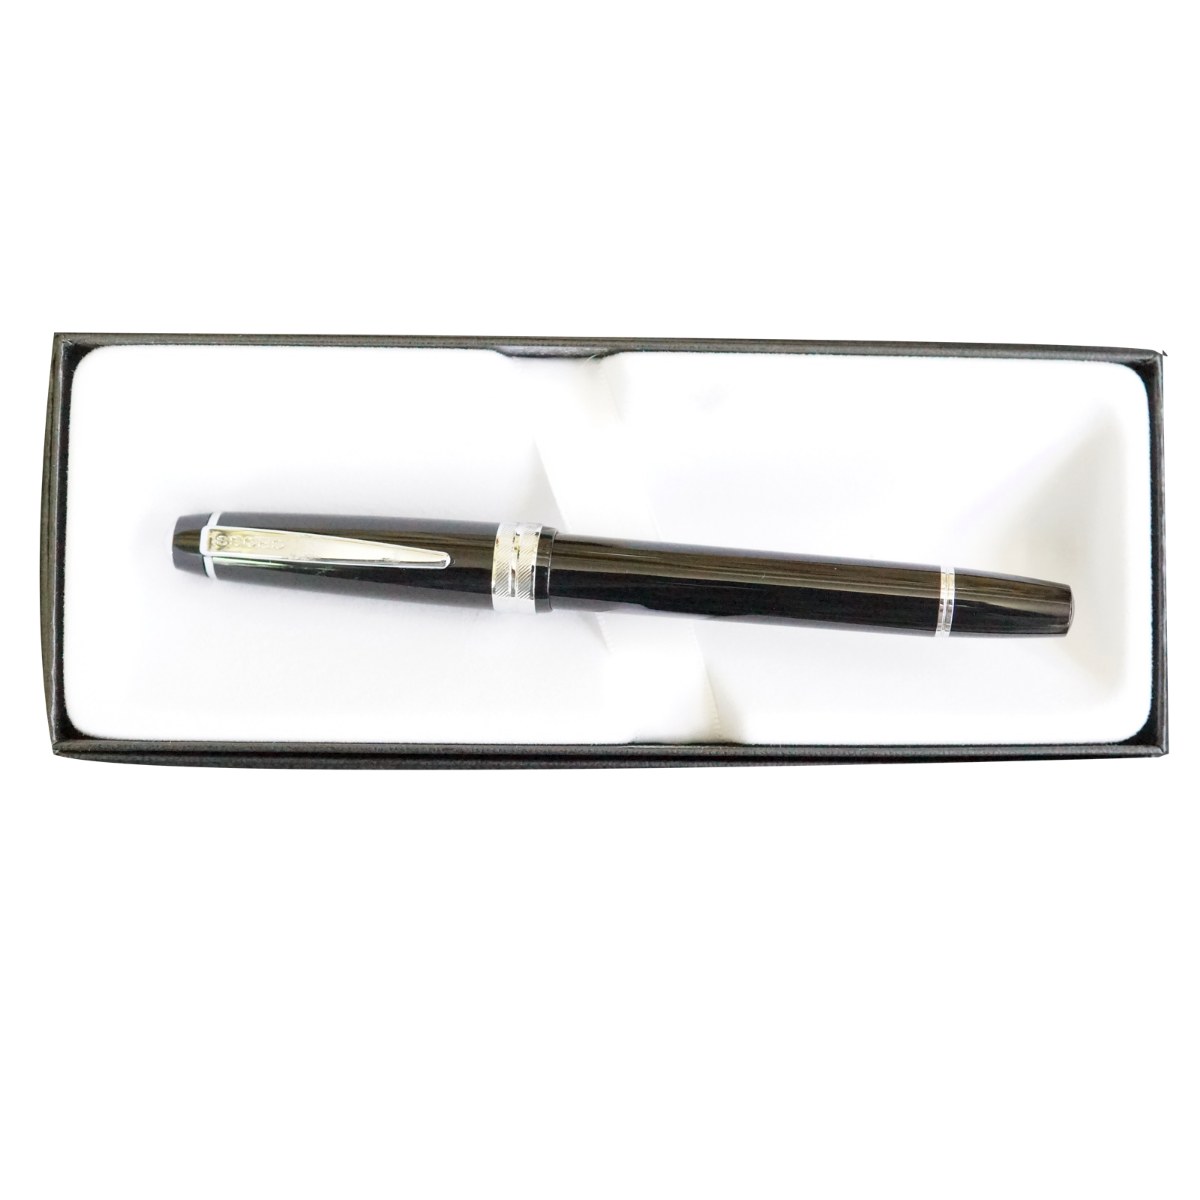 Cross AT0745-1  Model : 17687 Golssy Black Color Body With Silver Clip Cap Roller Ball